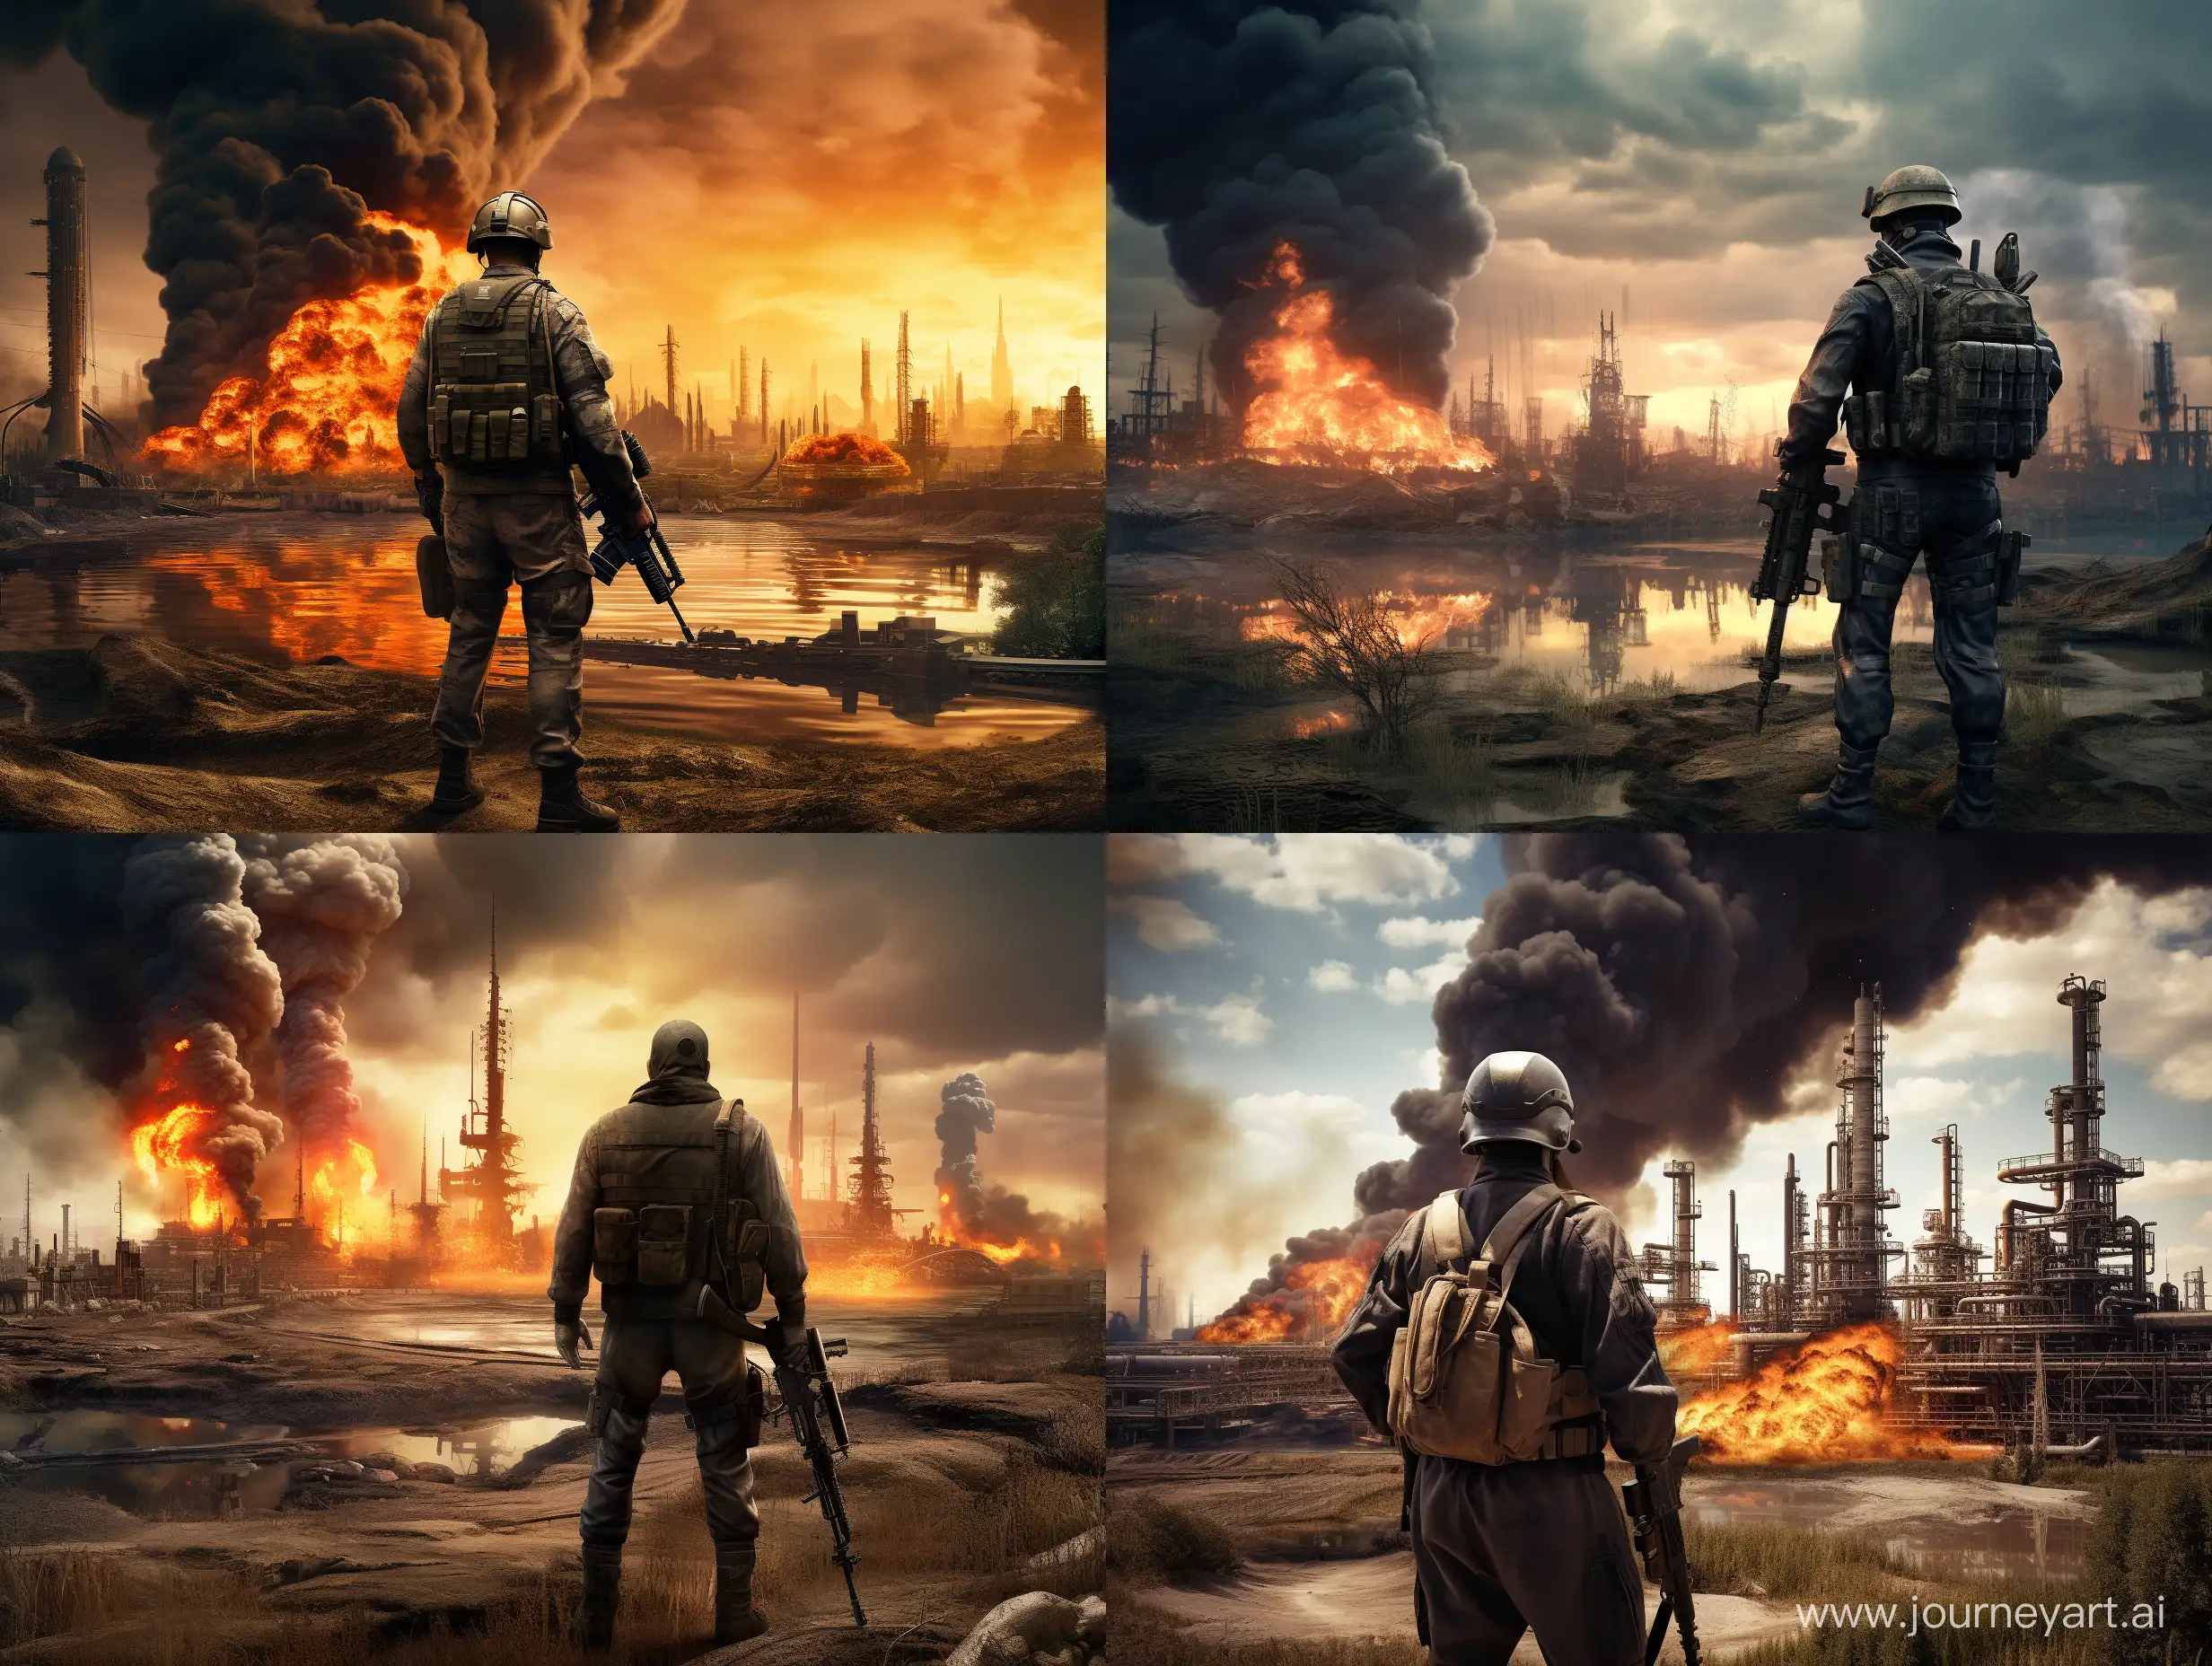 Determined-Soldier-Guarding-Amidst-Raging-Oil-Refinery-Fire